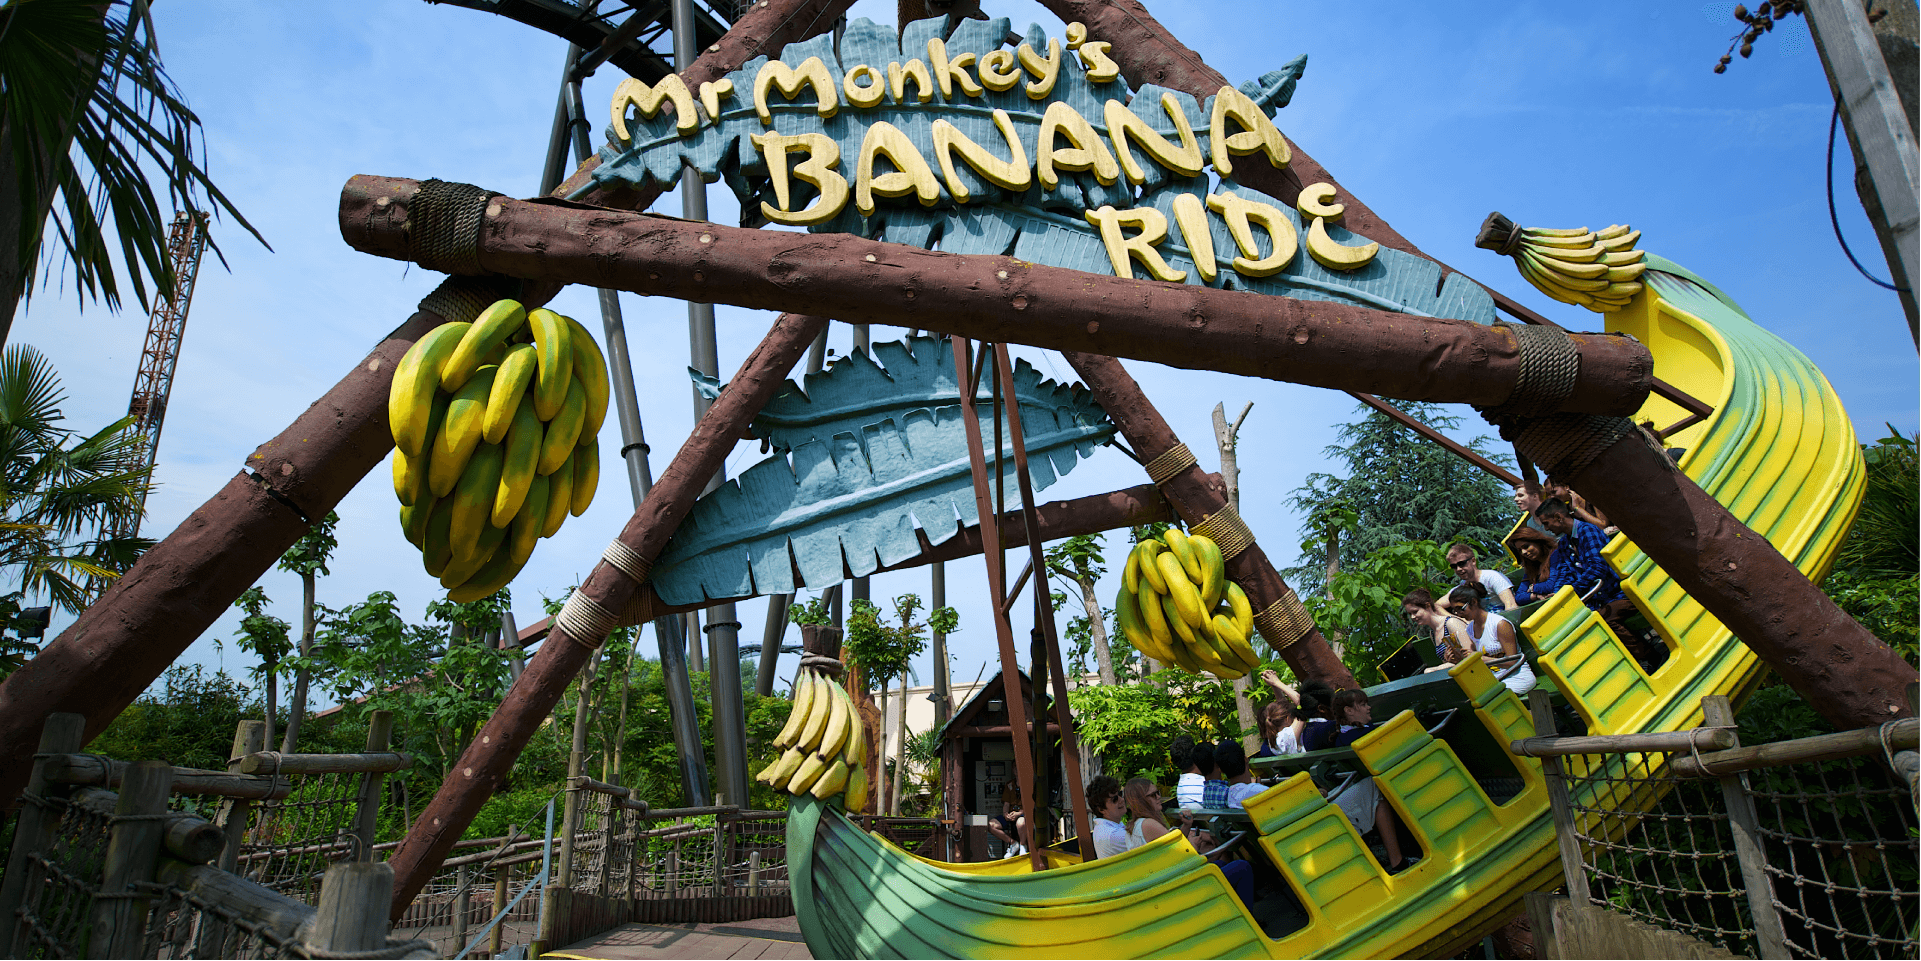 Banana Boat Ride Overview